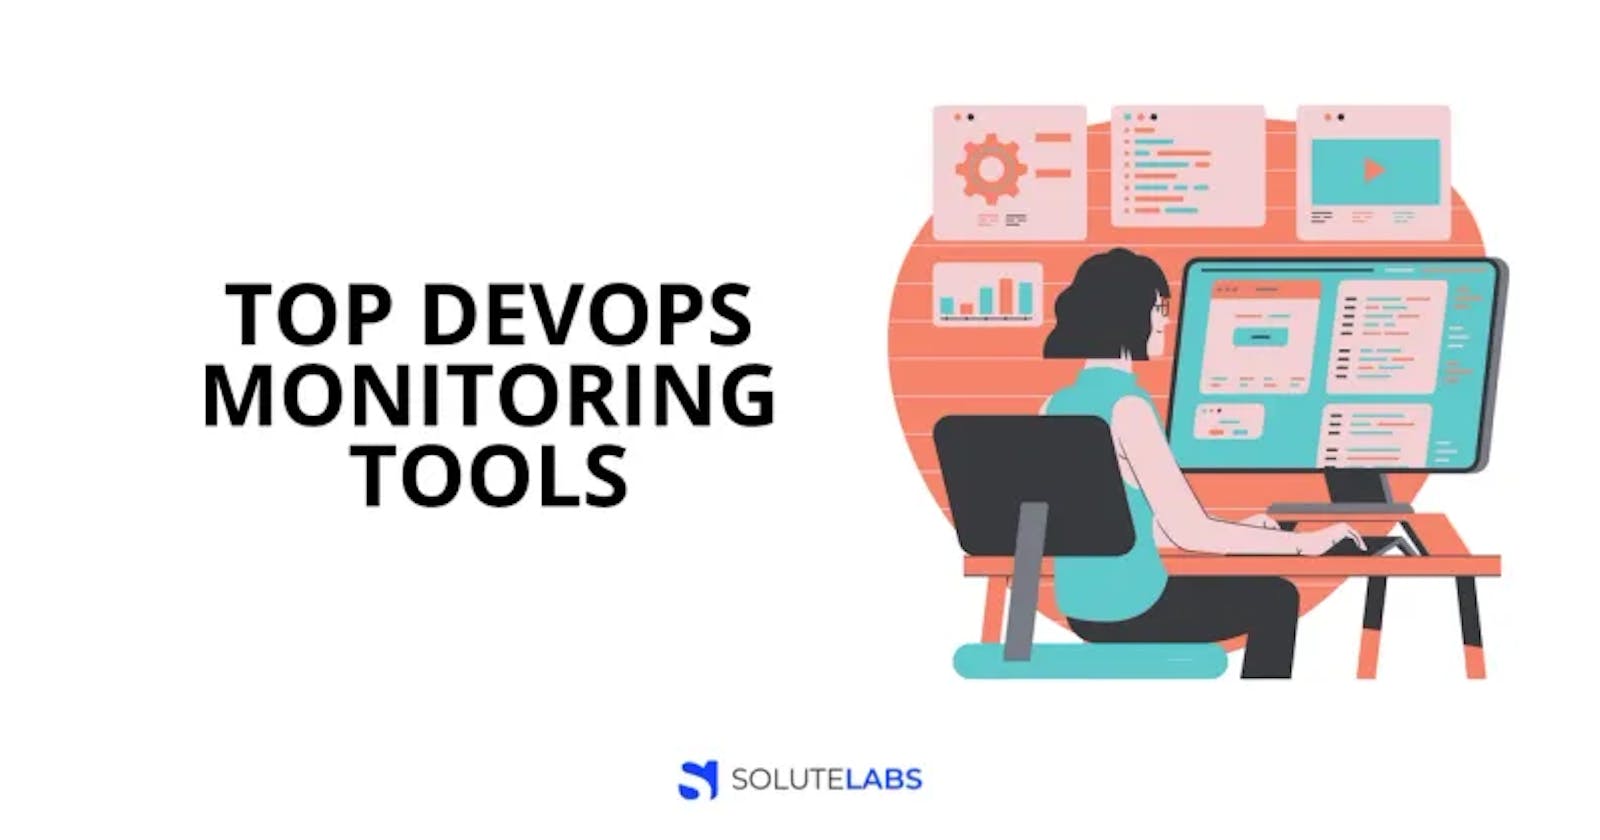 Top 21 DevOps Monitoring Tools To Use in 2022